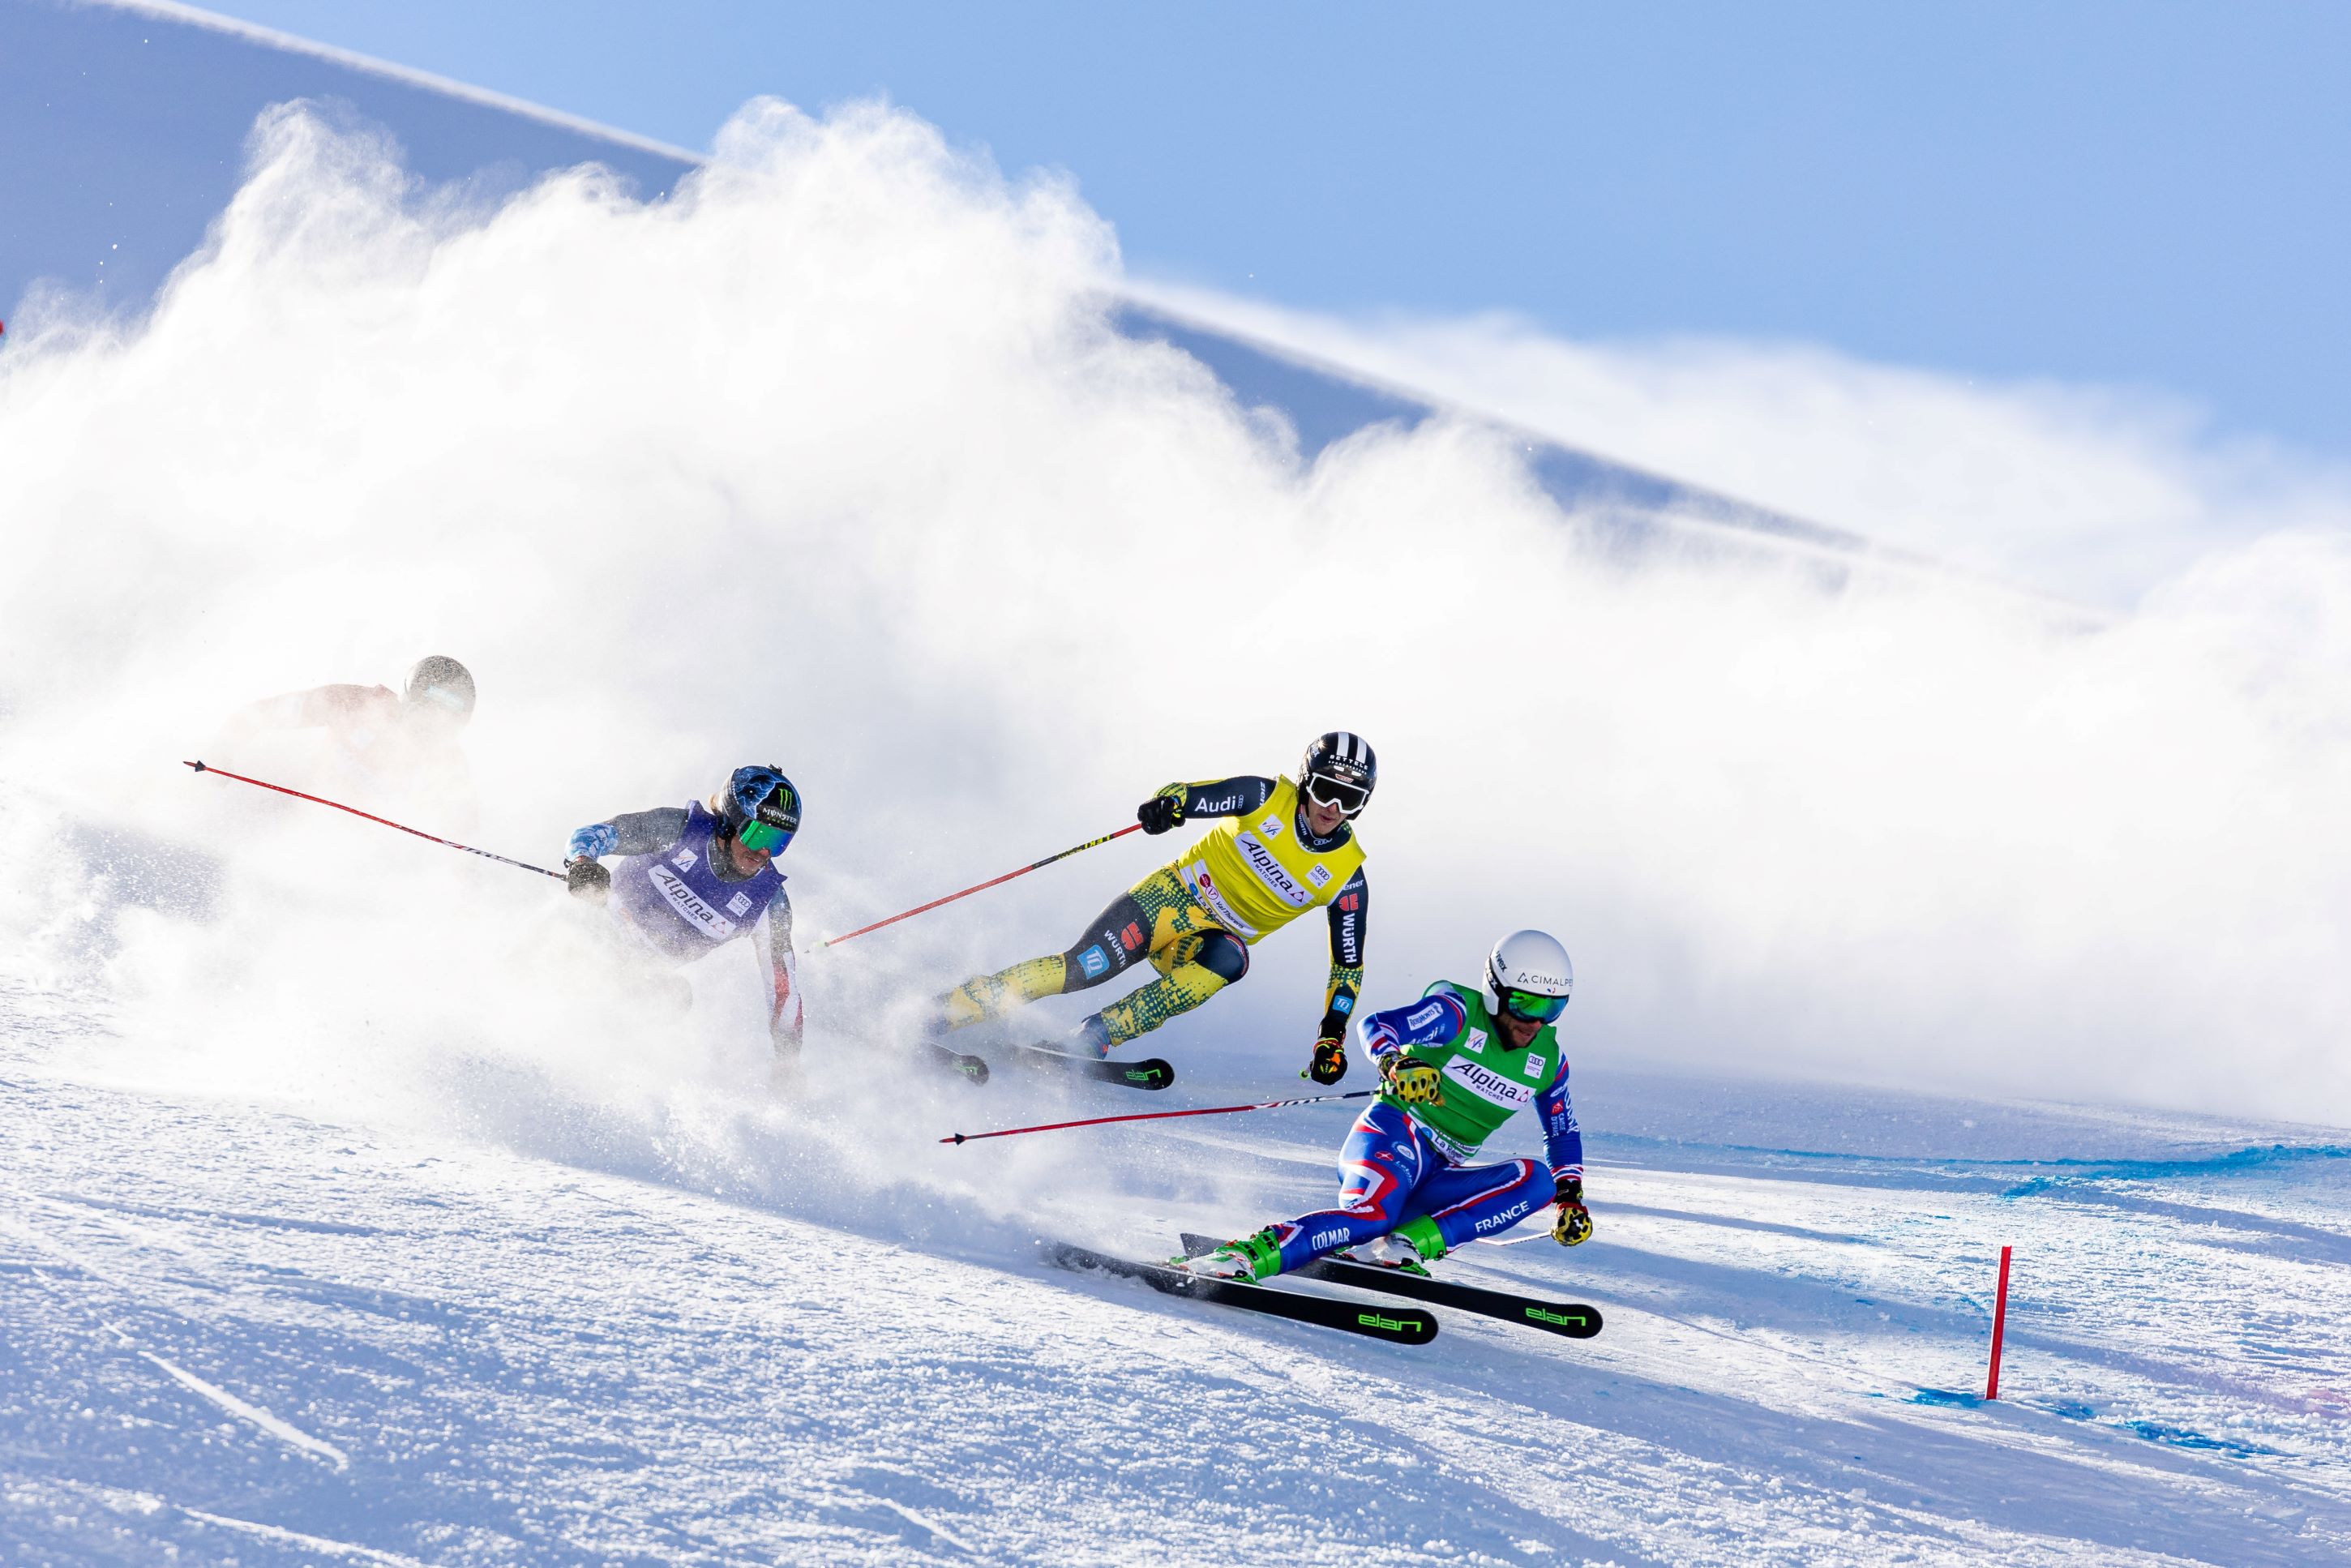  Ski Cross is one of the most interesting and engaging disciplines in the sport of skiing